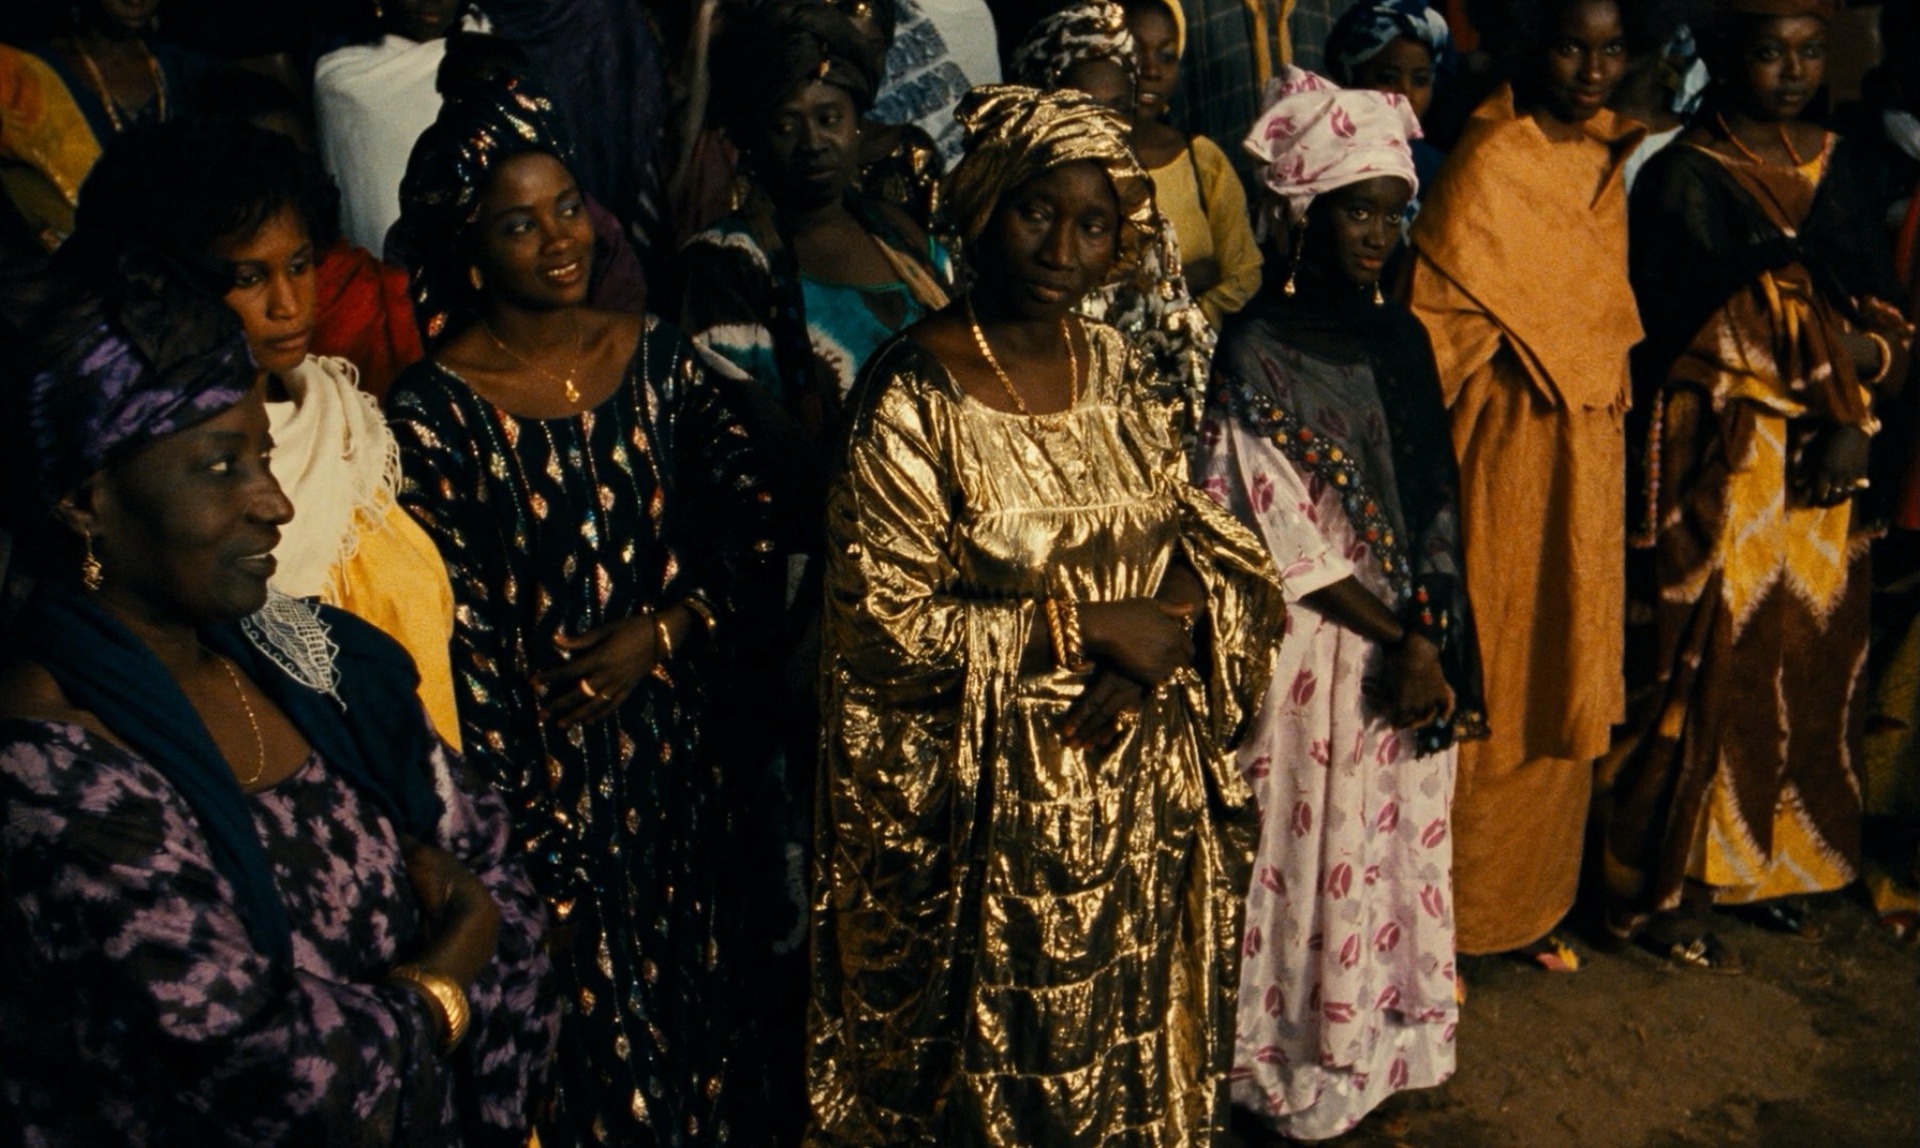 nikyatu:Staying inspired as a creative in this iteration of existence is an ongoing challenge, which is why I appreciate @shotdeck giving us the gift of hi res stills from Julie Dash’s DAUGHTERS OF THE DUST and Djibril Diop Mambéty’s HYENAS.I